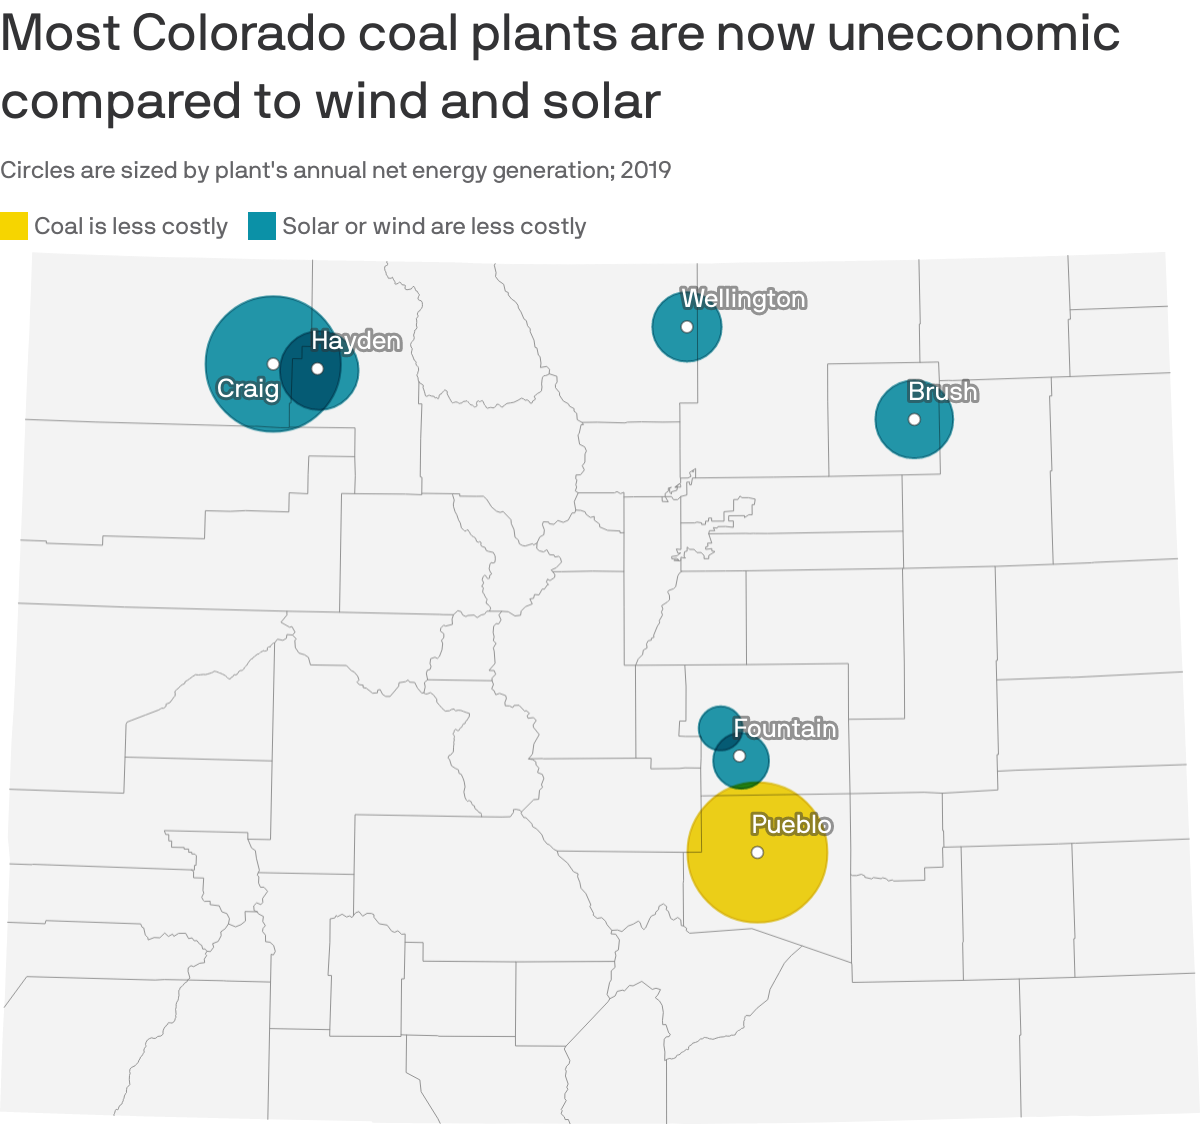 Most Colorado coal plants are now uneconomic compared to wind and solar